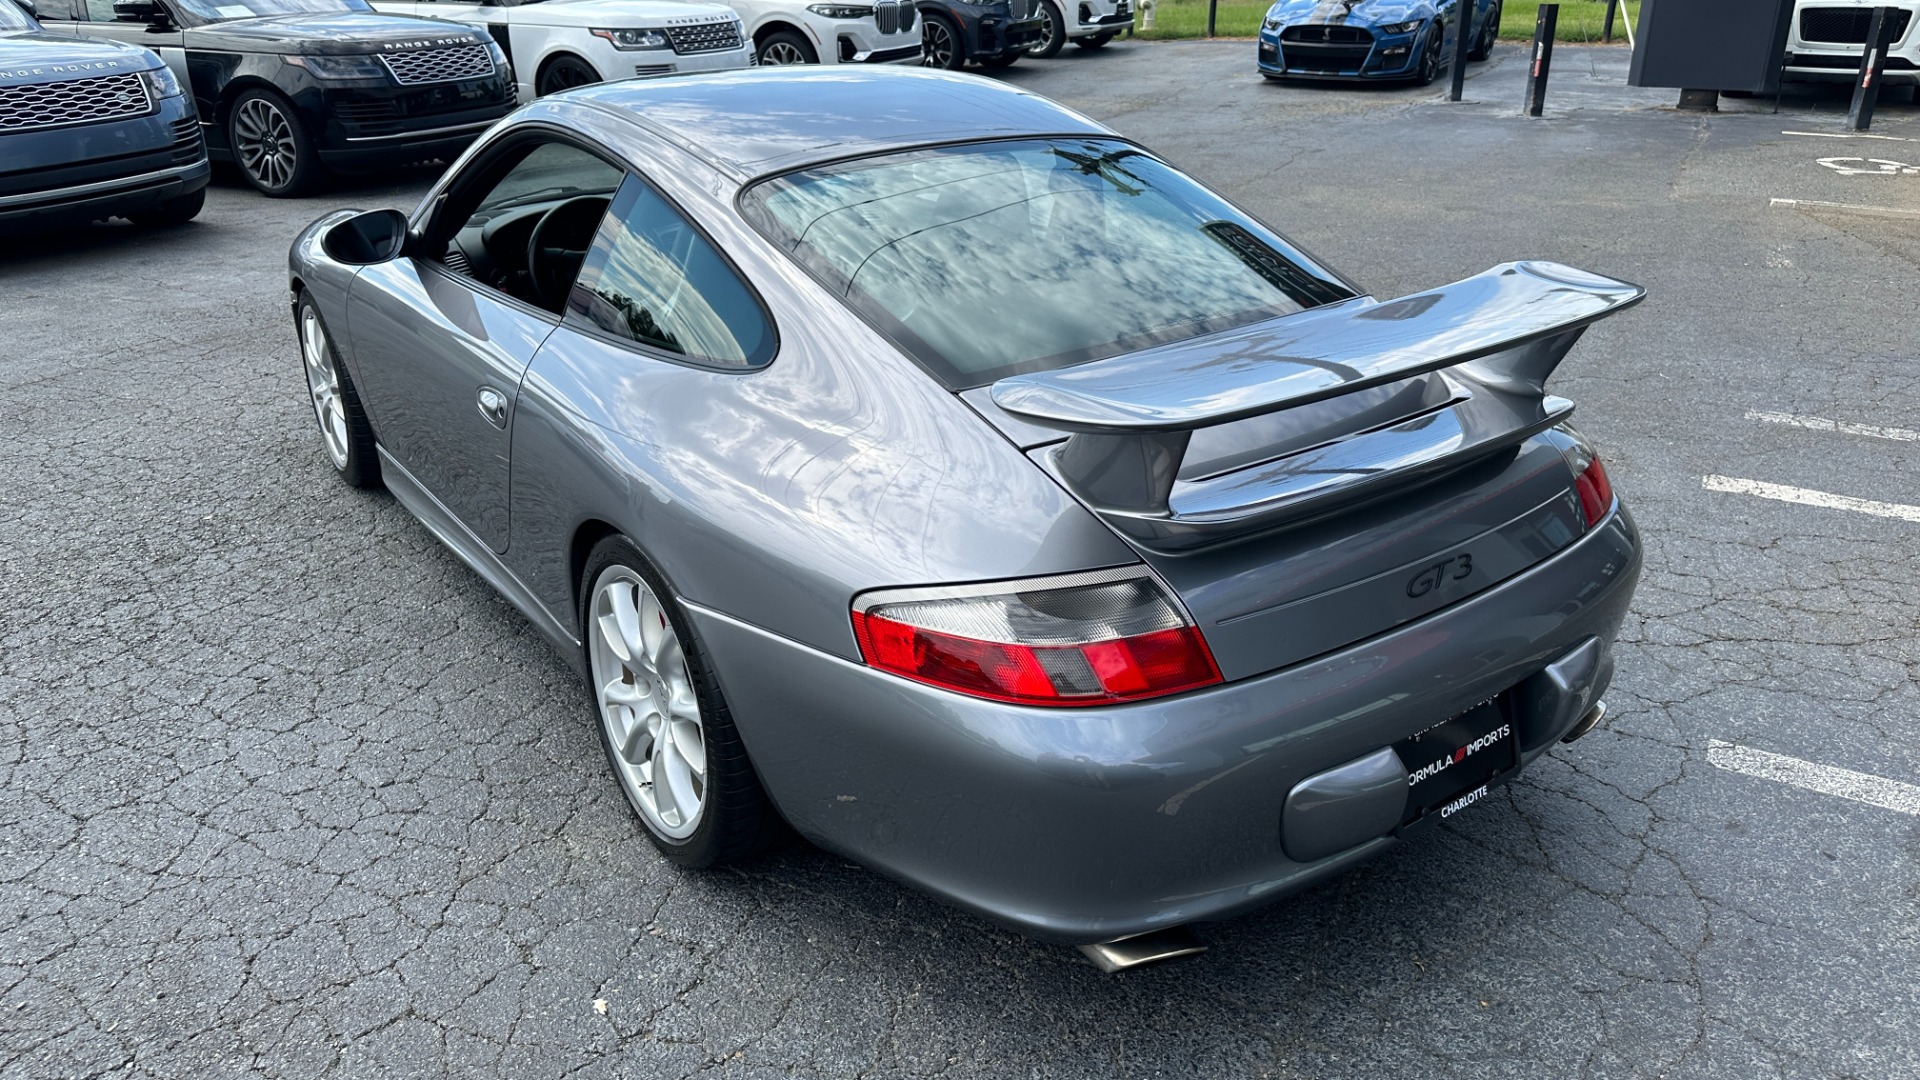 Used 2004 Porsche 911 GT3 / SPORTS SEATS / SERVICE BINDER / CLEAN DME for sale $121,900 at Formula Imports in Charlotte NC 28227 4